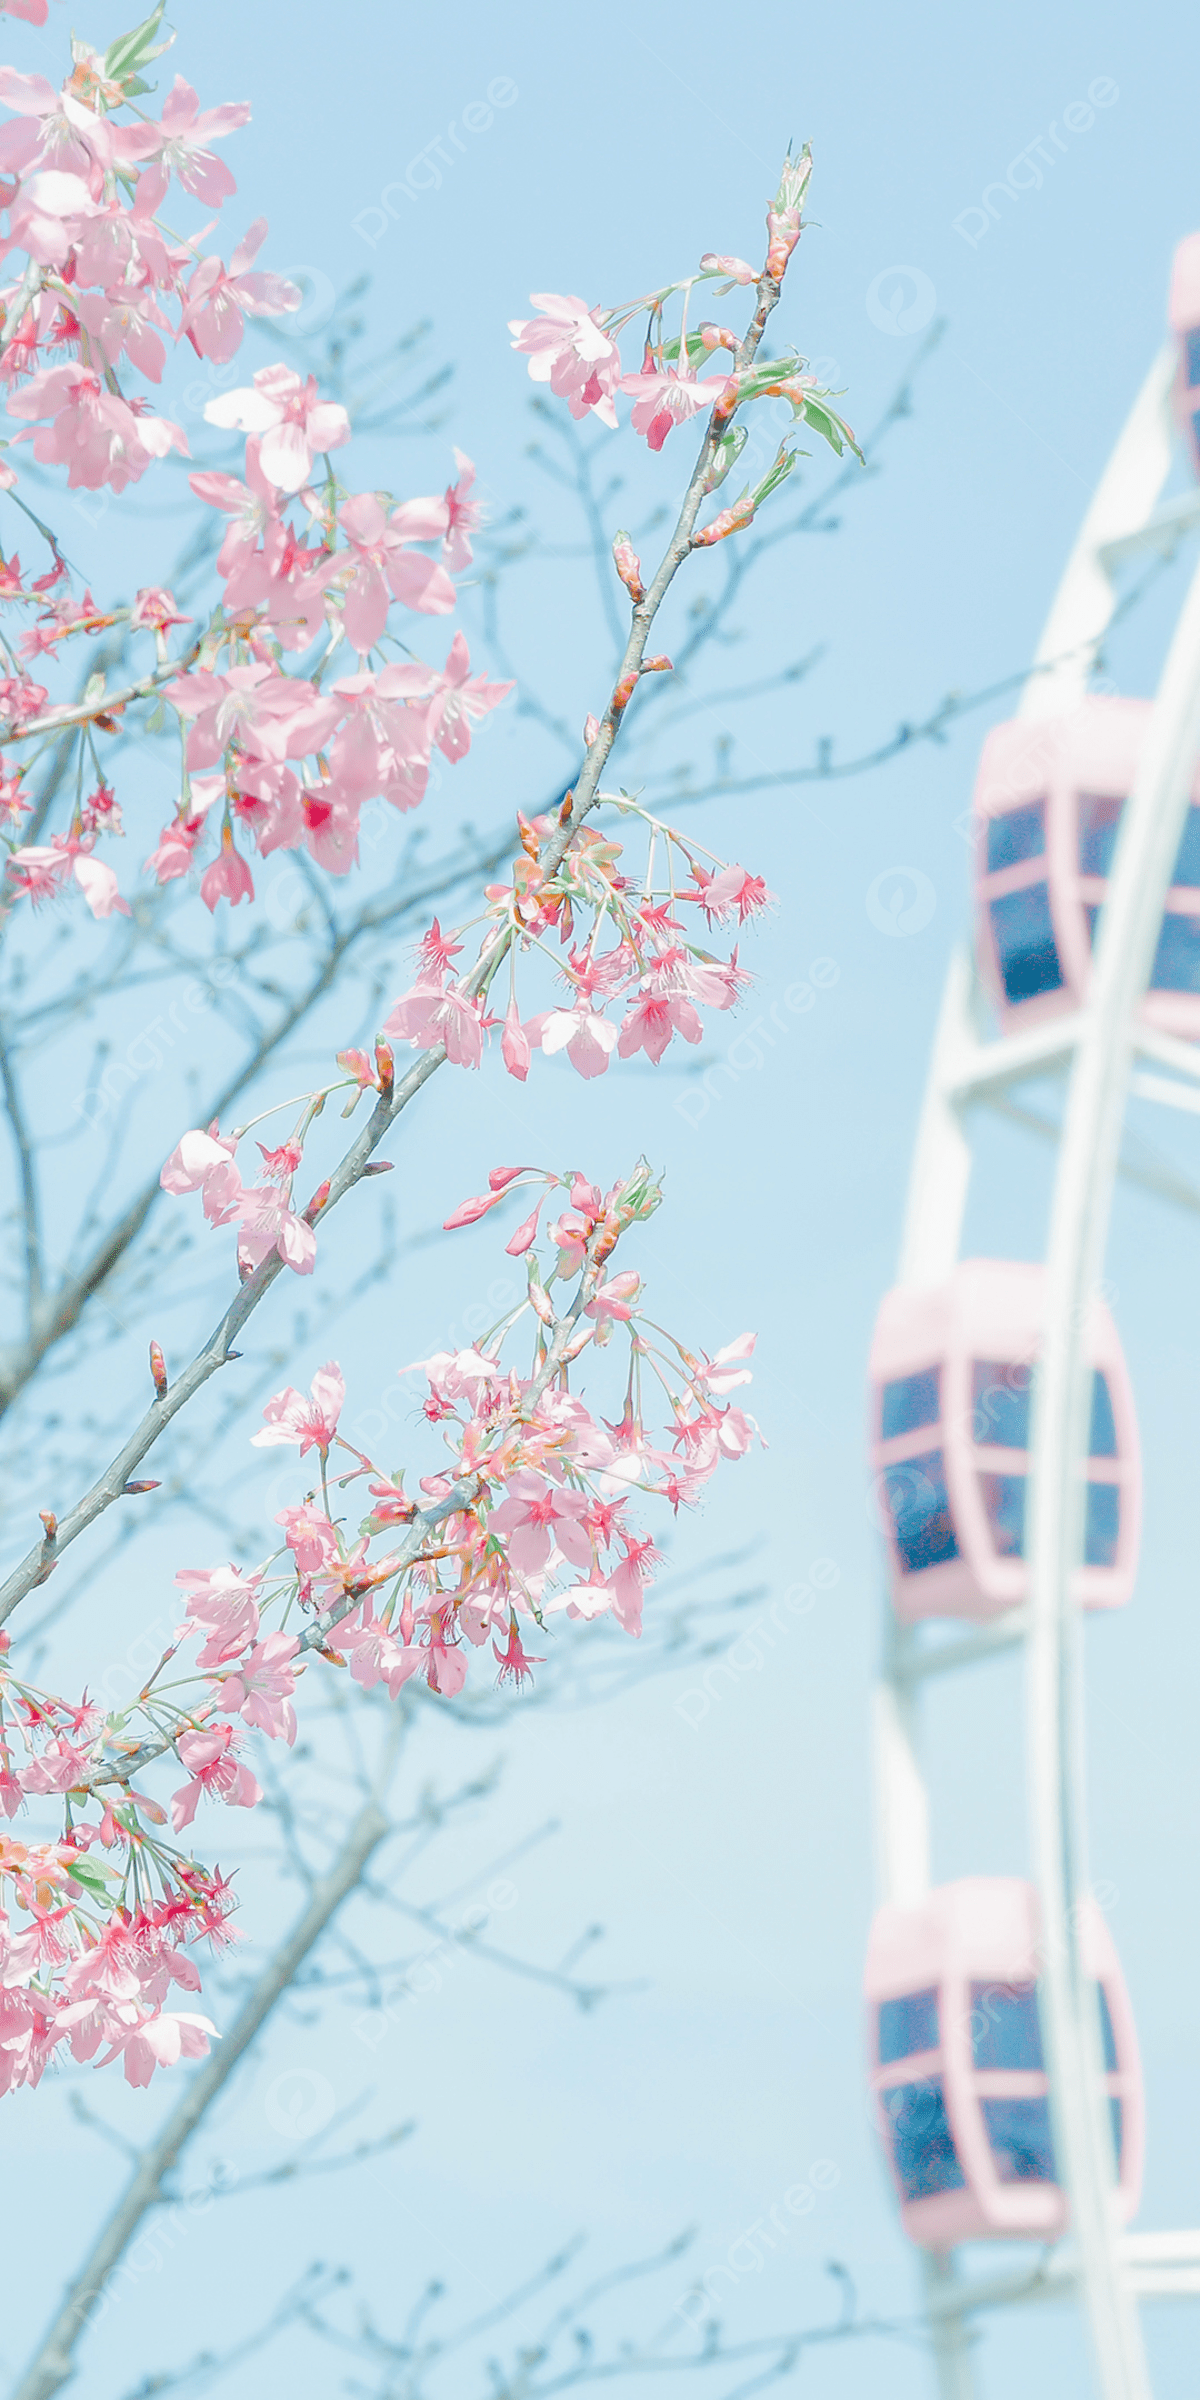 Pink Cherry Blossom Mobile Wallpaper Ferris Wheel Background, Pink Wallpaper, Cherry Blossom Decoration, Cute Background Image for Free Download